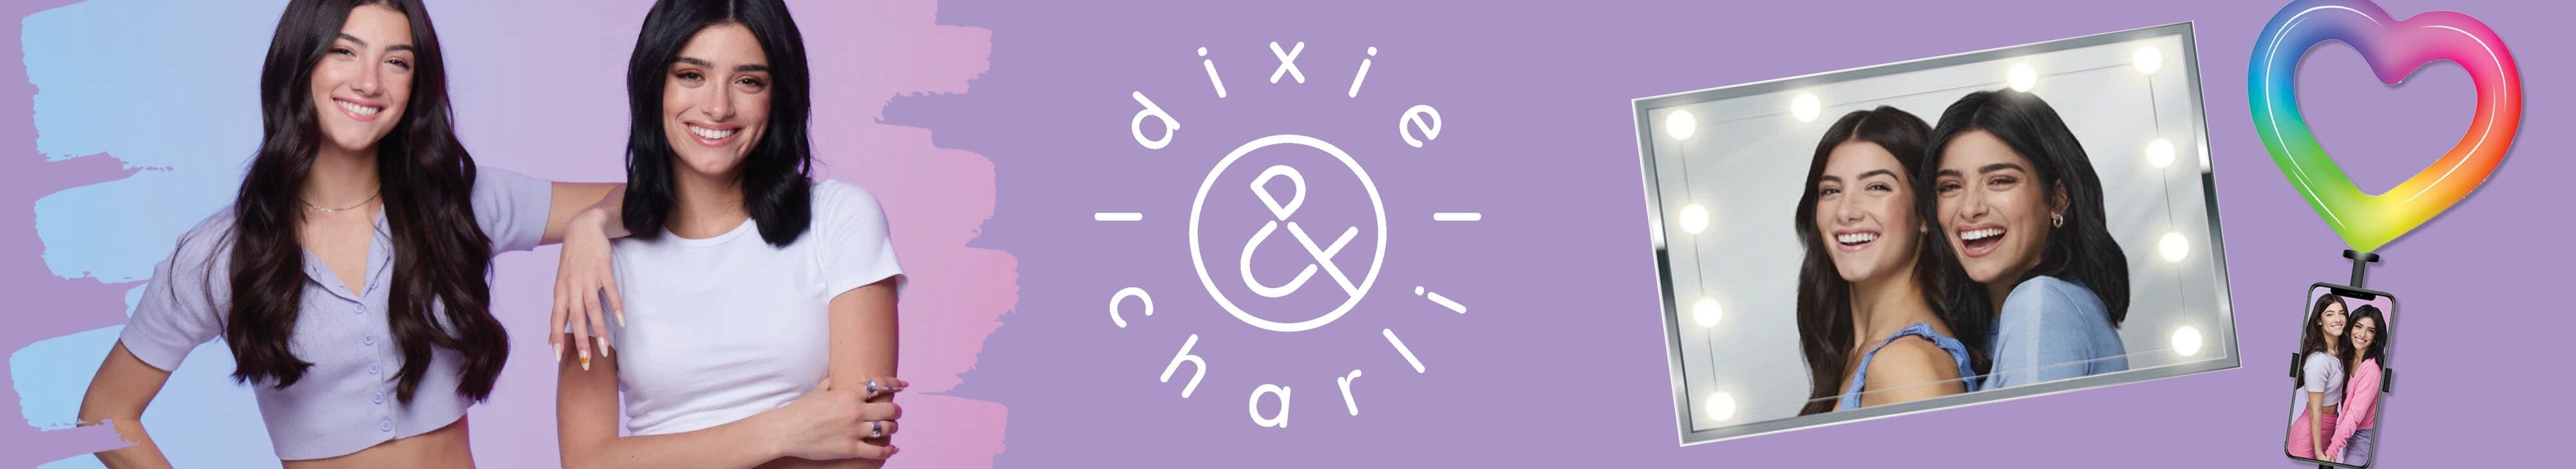 Dixie & Charli Collection